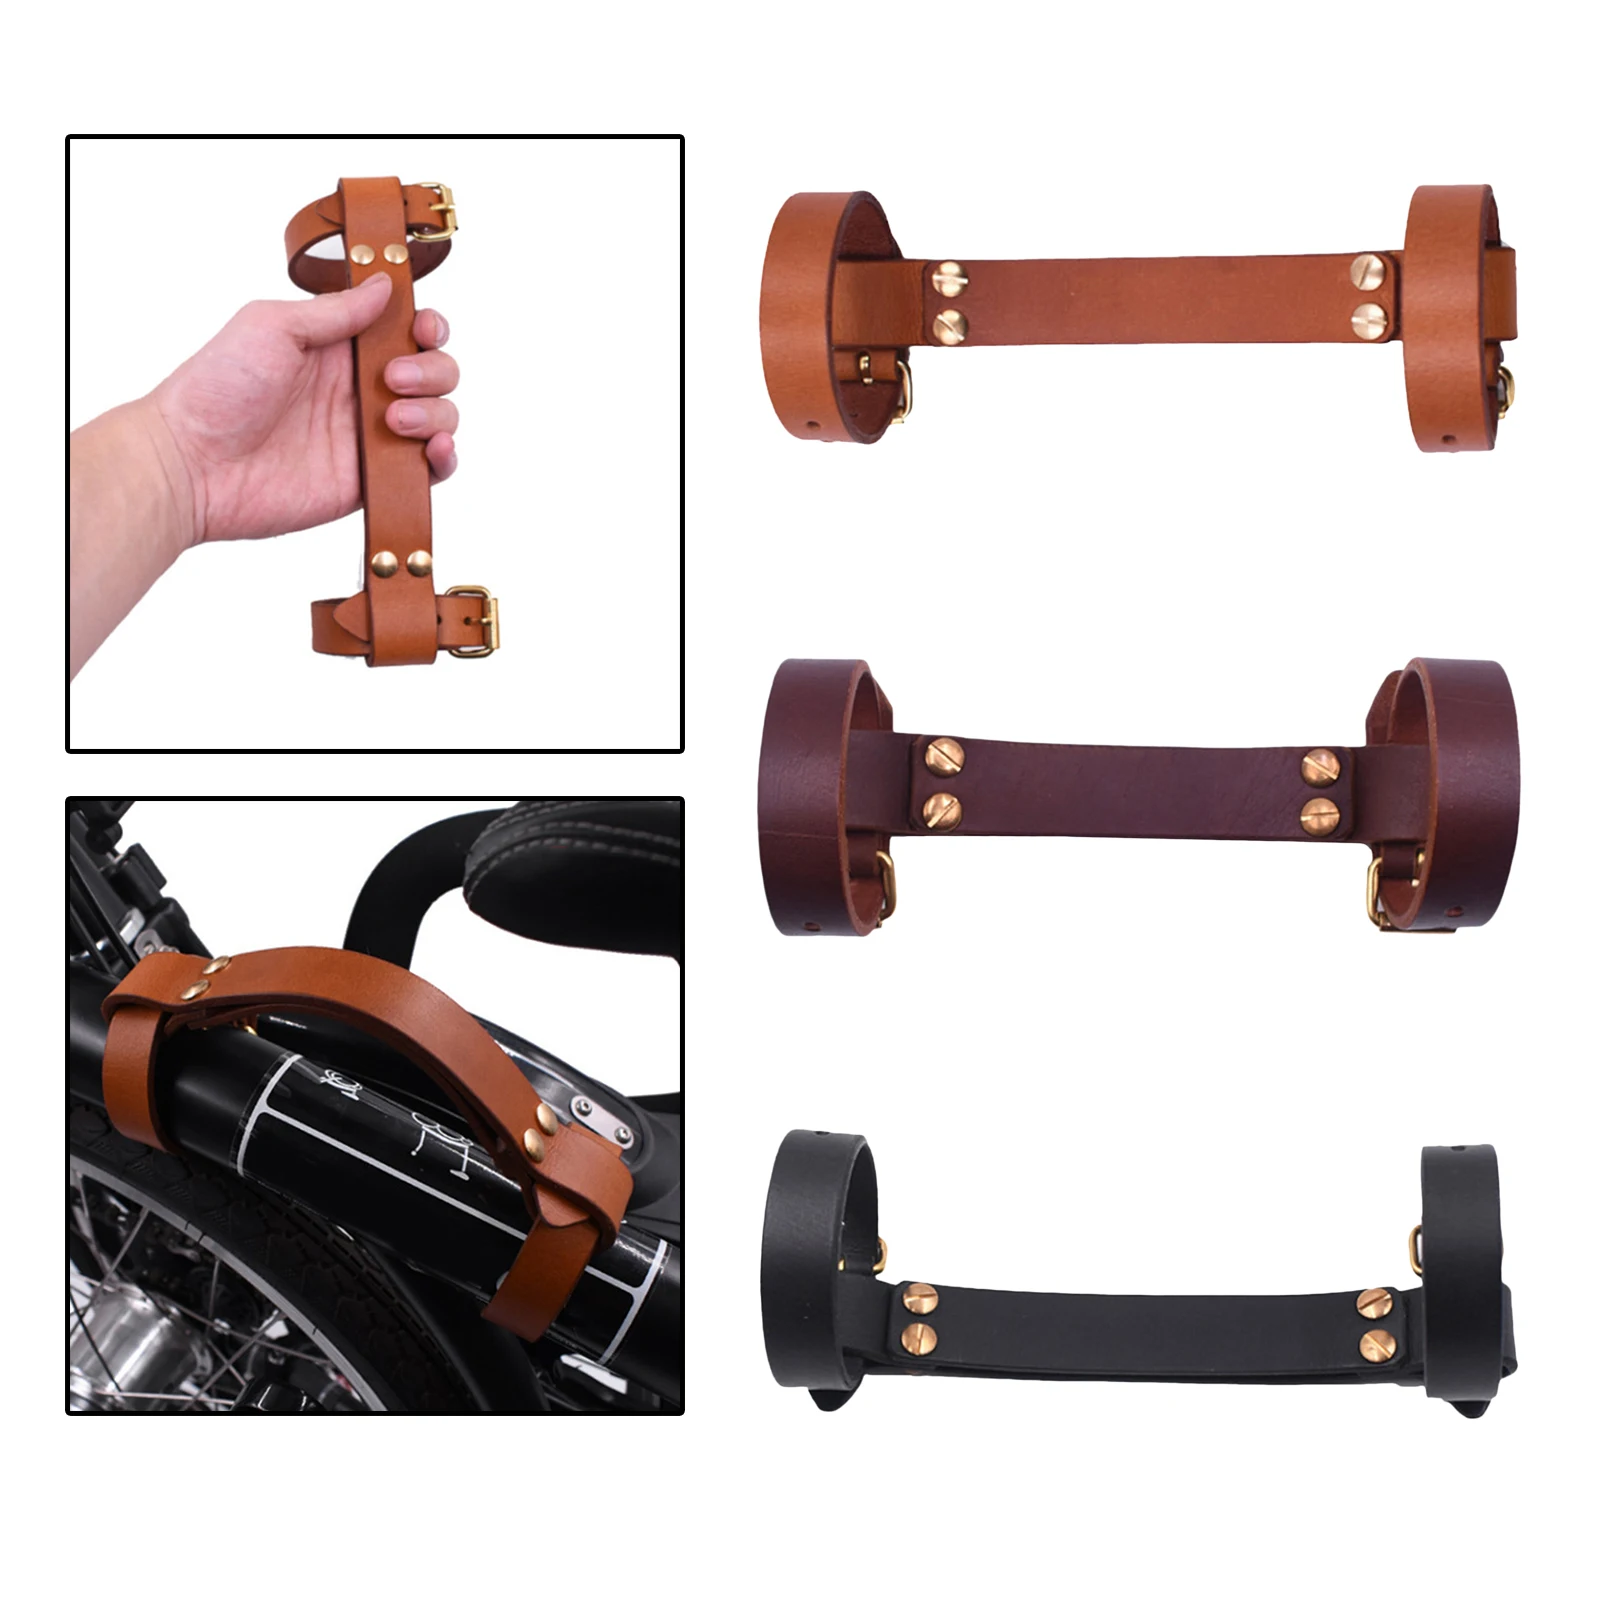 Foldable Bicycle Reliable Craftwork Carrying Bike Handlebar Handle Straps for Travel